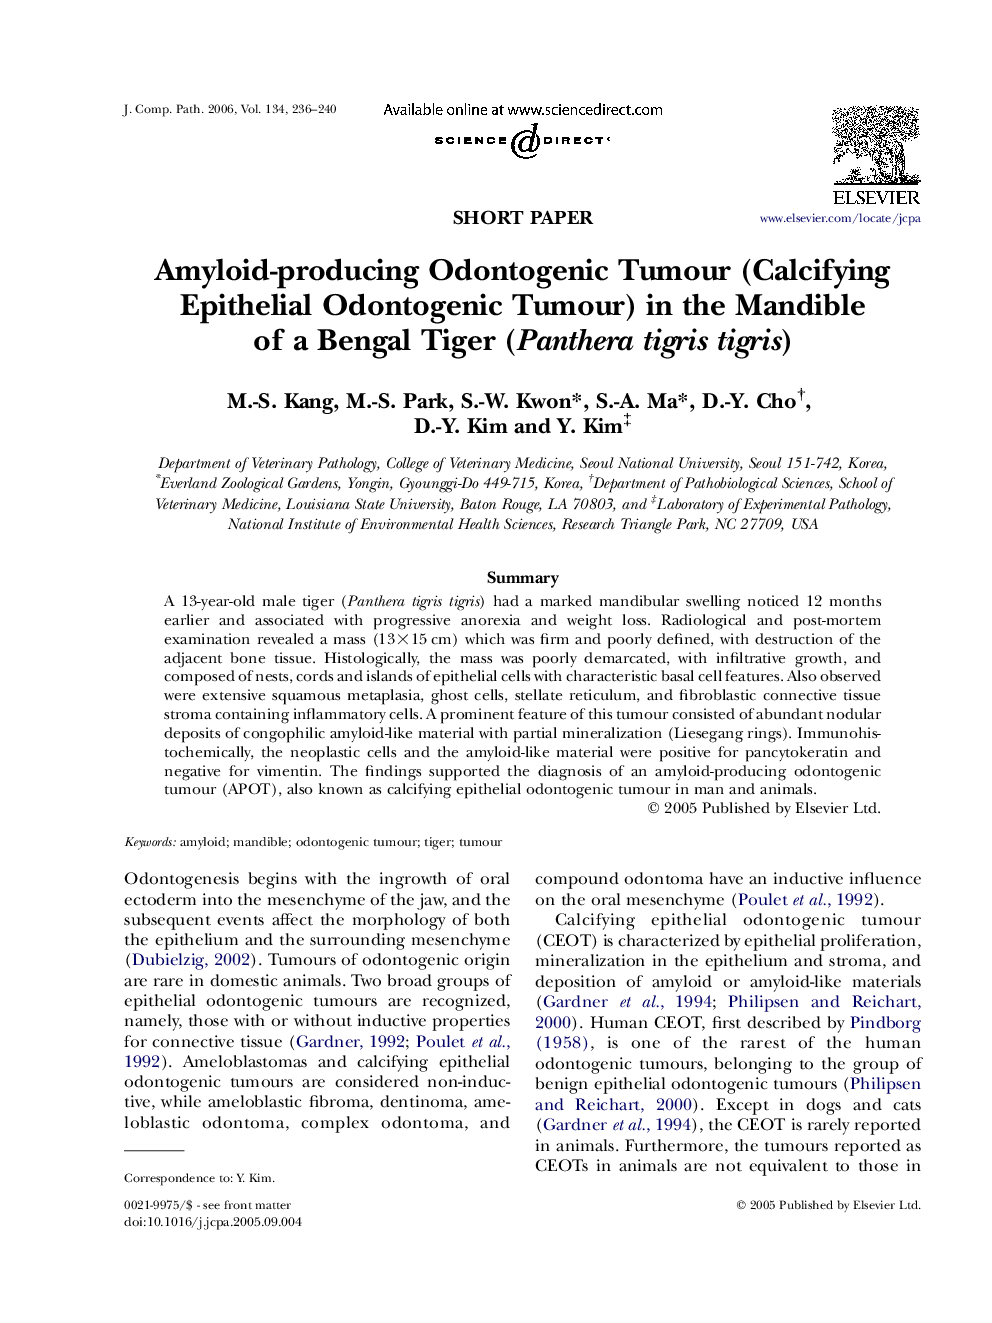 Amyloid-producing Odontogenic Tumour (Calcifying Epithelial Odontogenic Tumour) in the Mandible of a Bengal Tiger (Panthera tigris tigris)